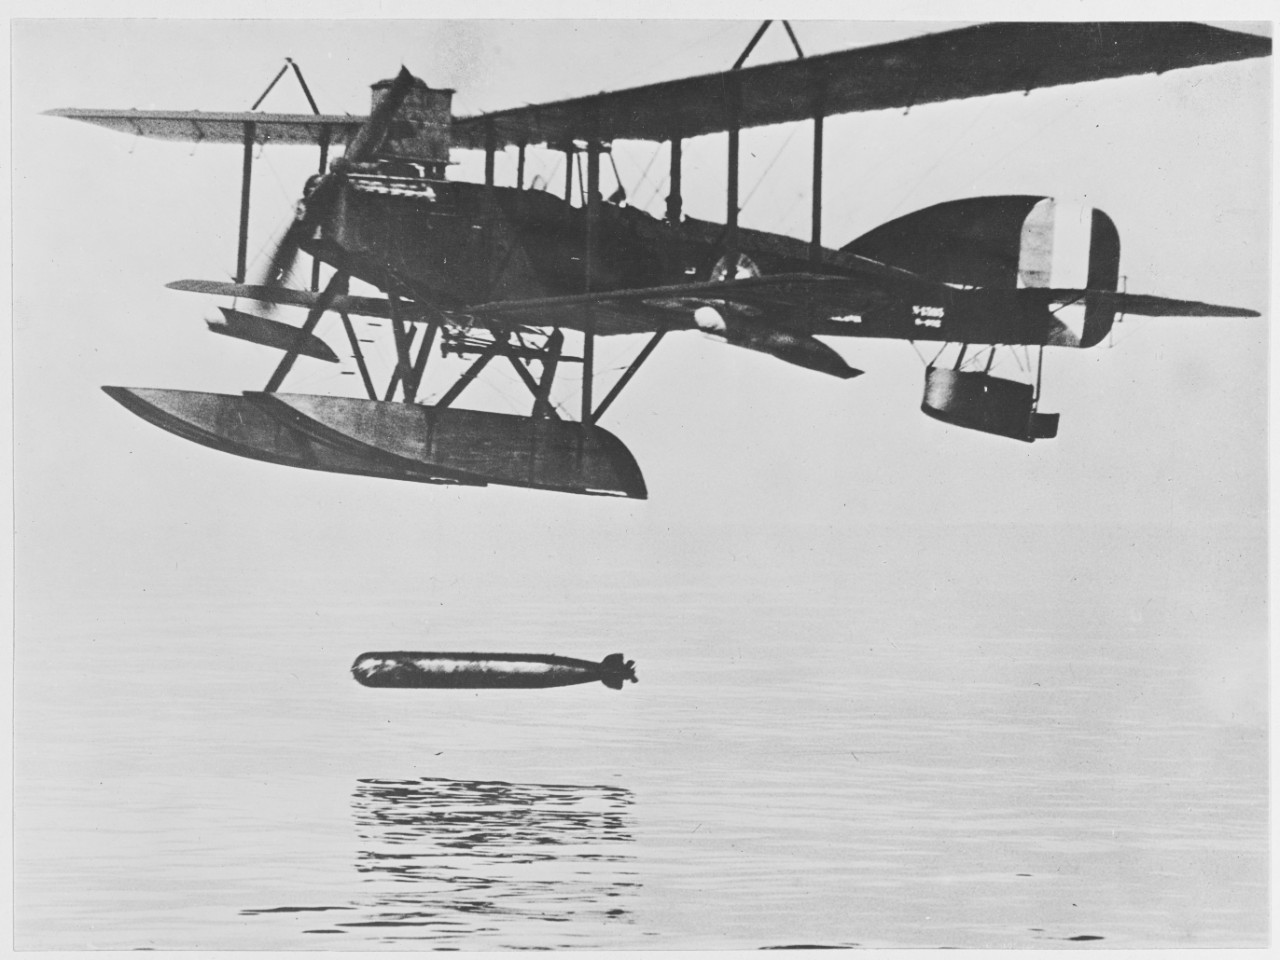 Dropping aerial torpedo from seaplane, British